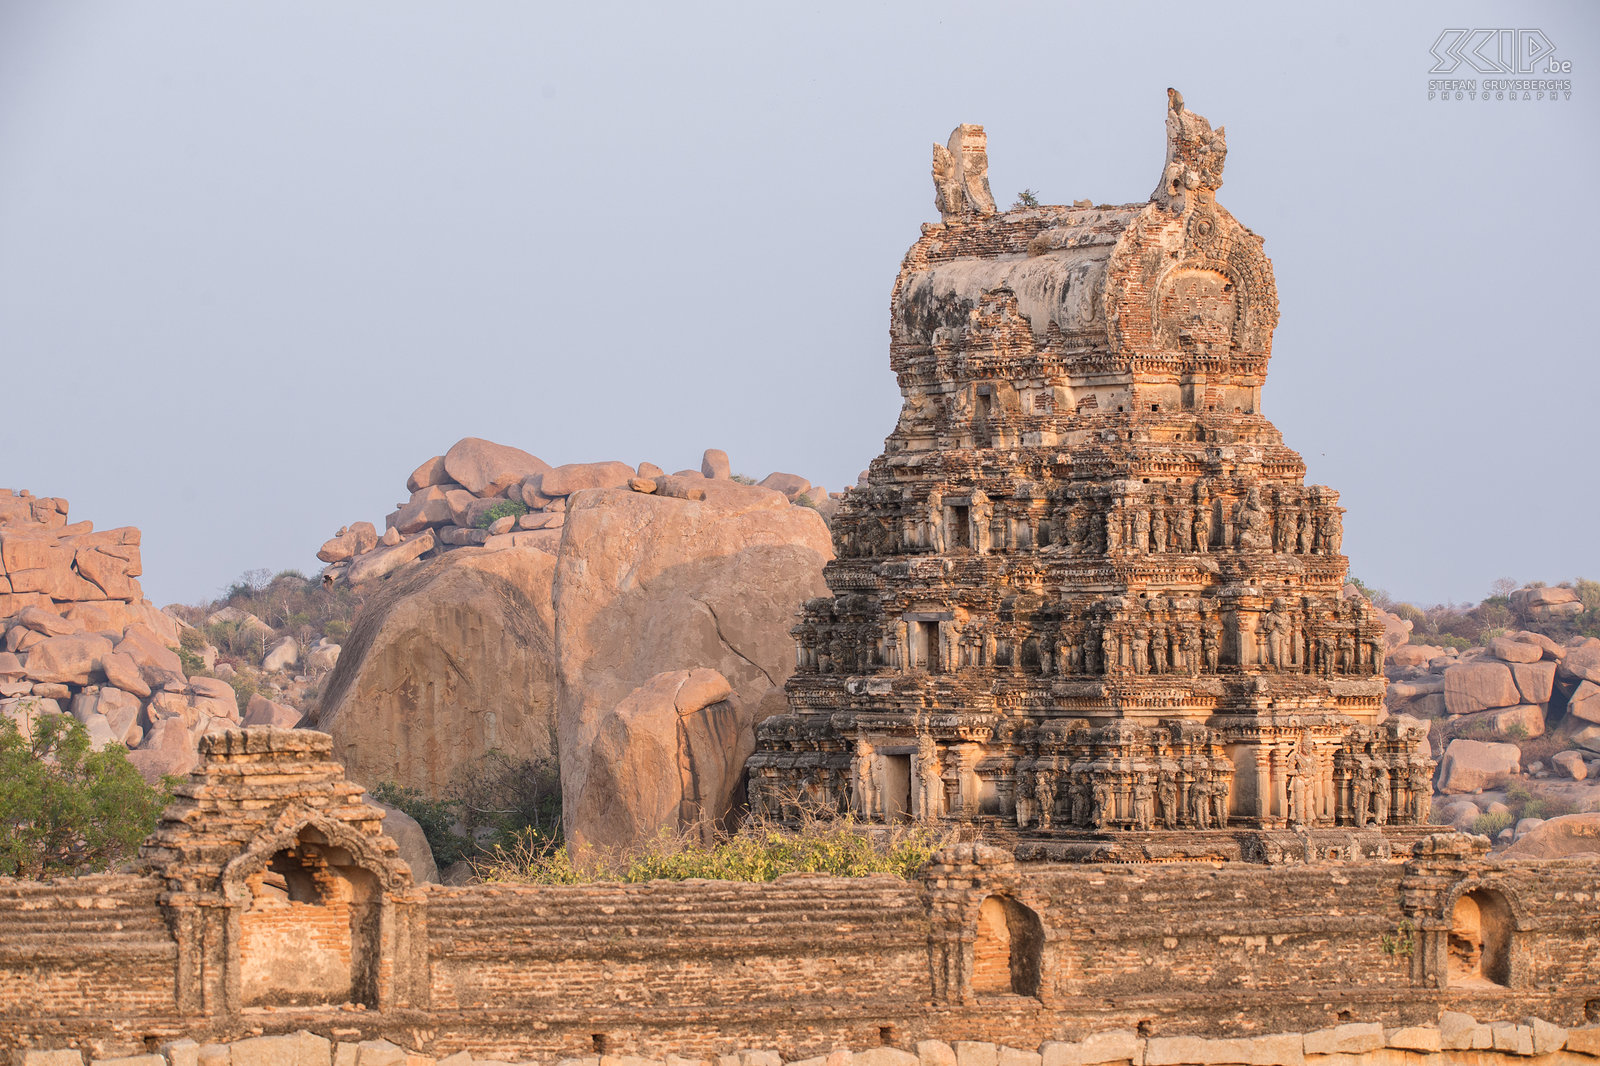 Hampi - Malyavanta temple On the top of the Malyavanta hill there is a temple dedicated to lord Rama, one of the reincarnations of the Hindu God Vishnu. Stefan Cruysberghs